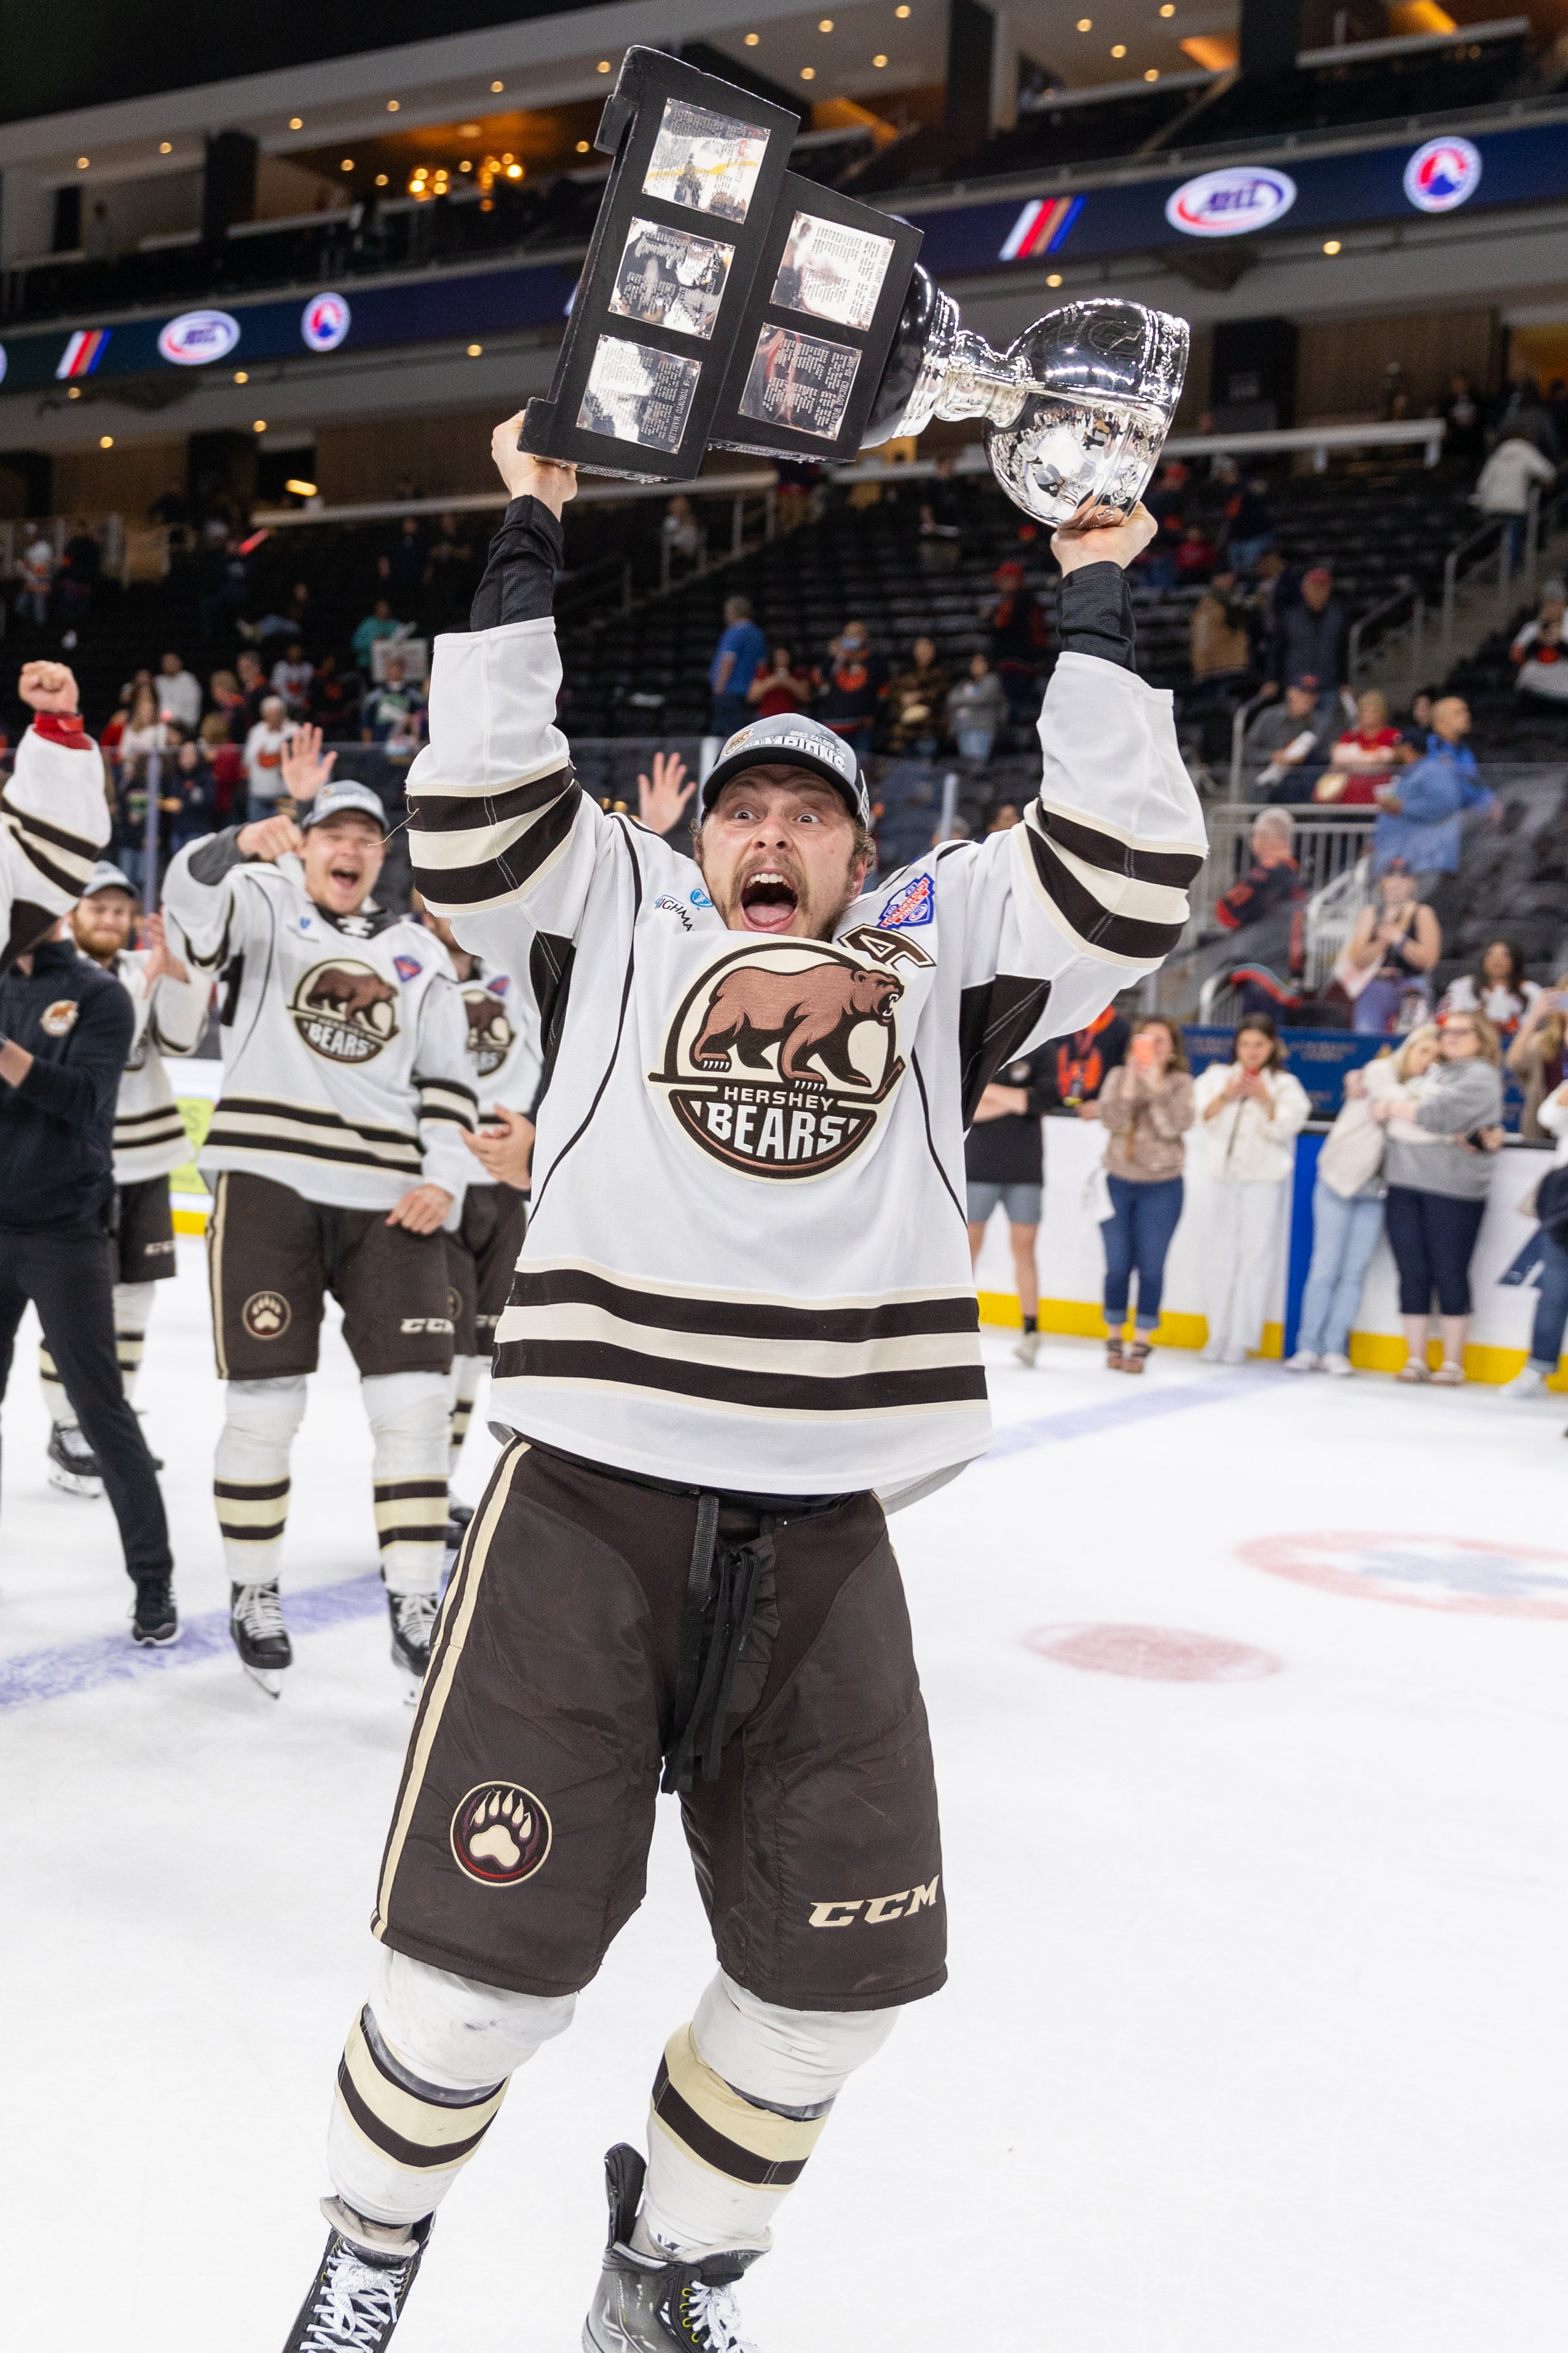 Hershey Bears ready for week outdoors as Outdoor Classic takes